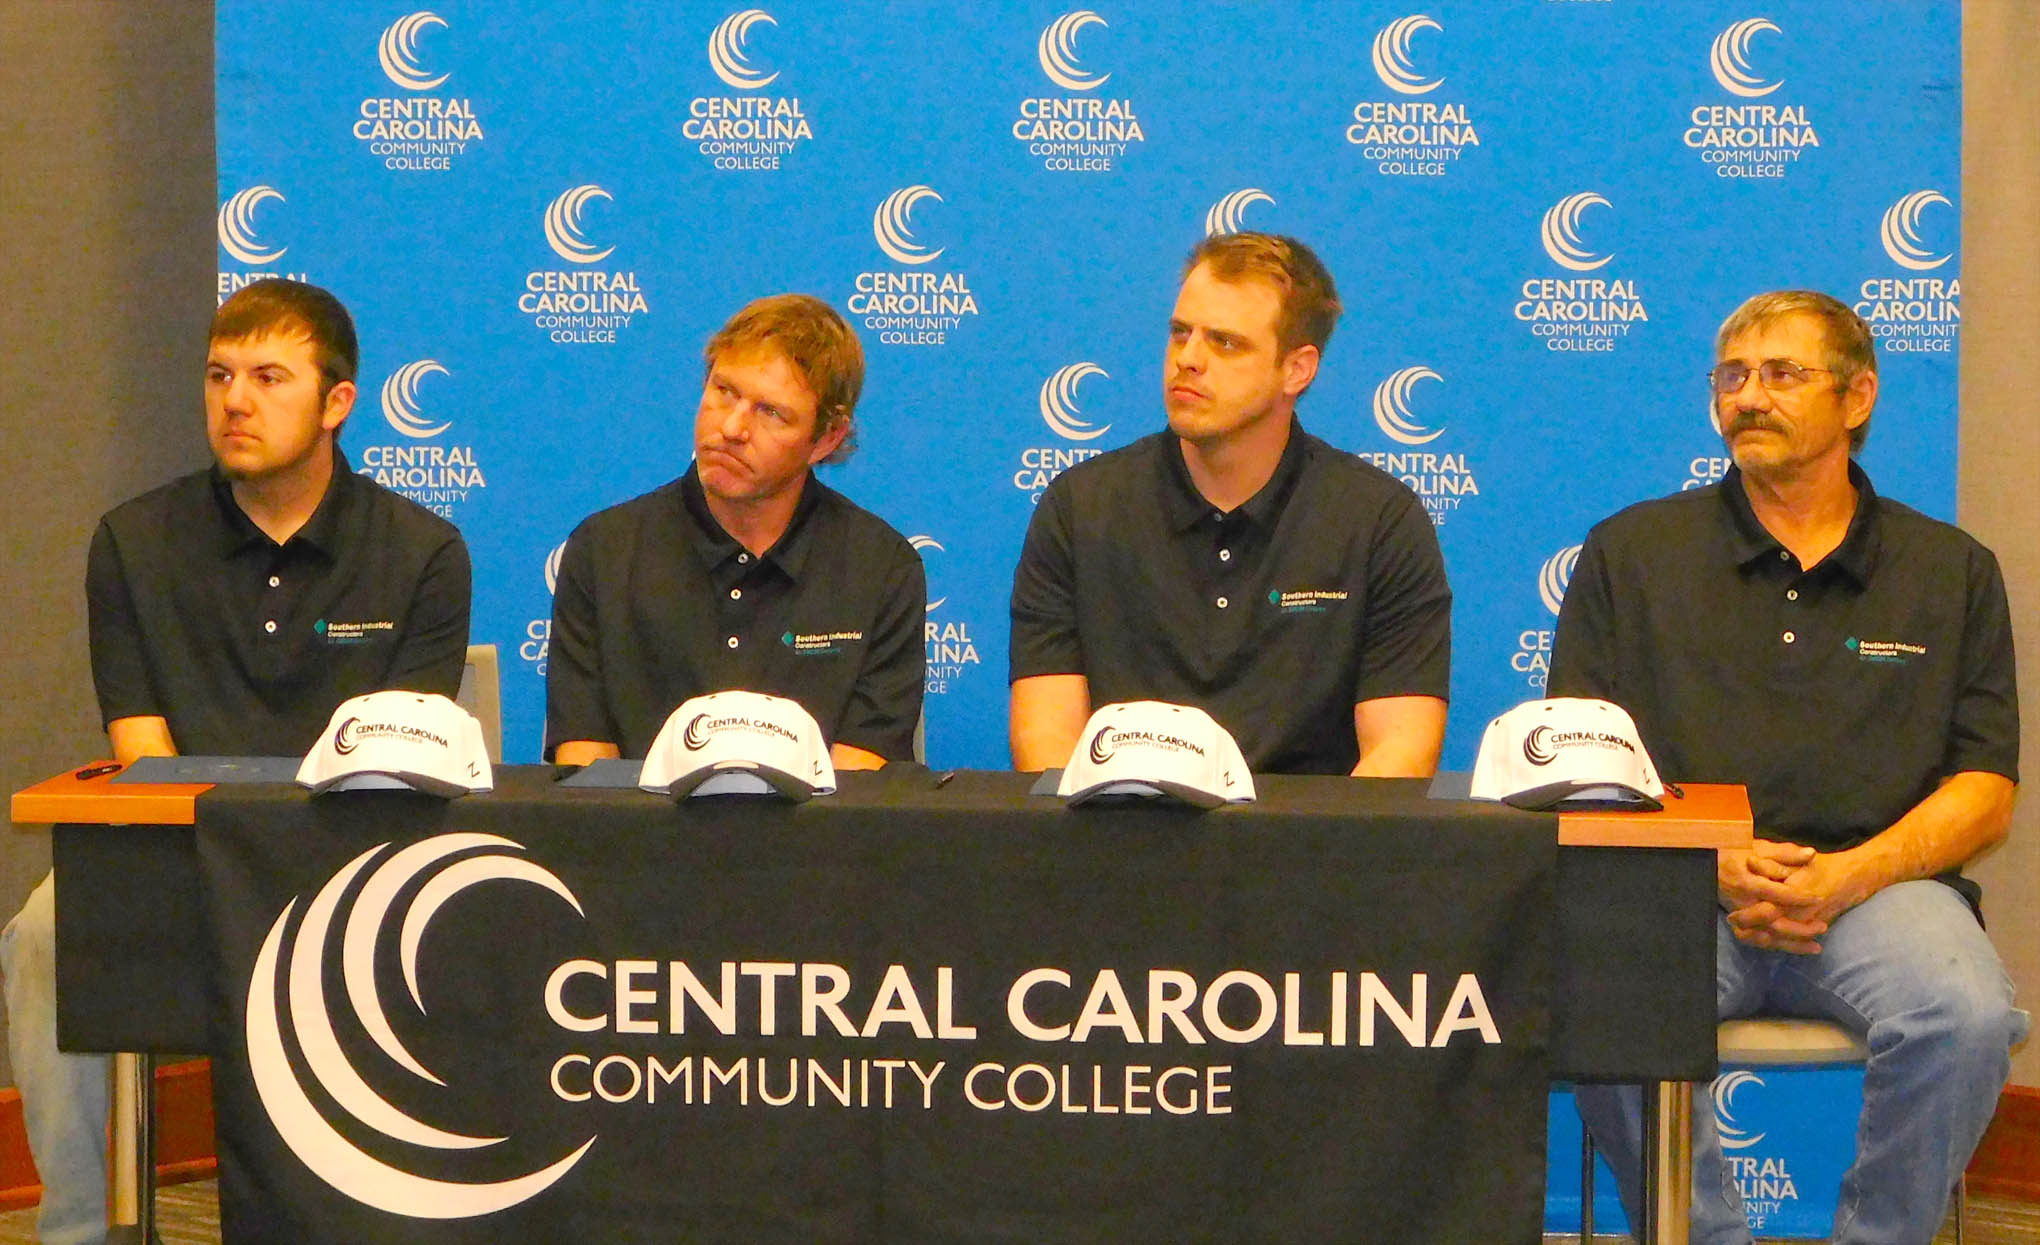 Click to enlarge,  Central Carolina Community College has joined with Southern Industrial Constructors and 3M to begin the new Southern Industrial Apprenticeship Program. The new apprentices are pictured, left to right: Mason Hege, Daniel Mize, Clifton Banner, and Garry Krontz. 